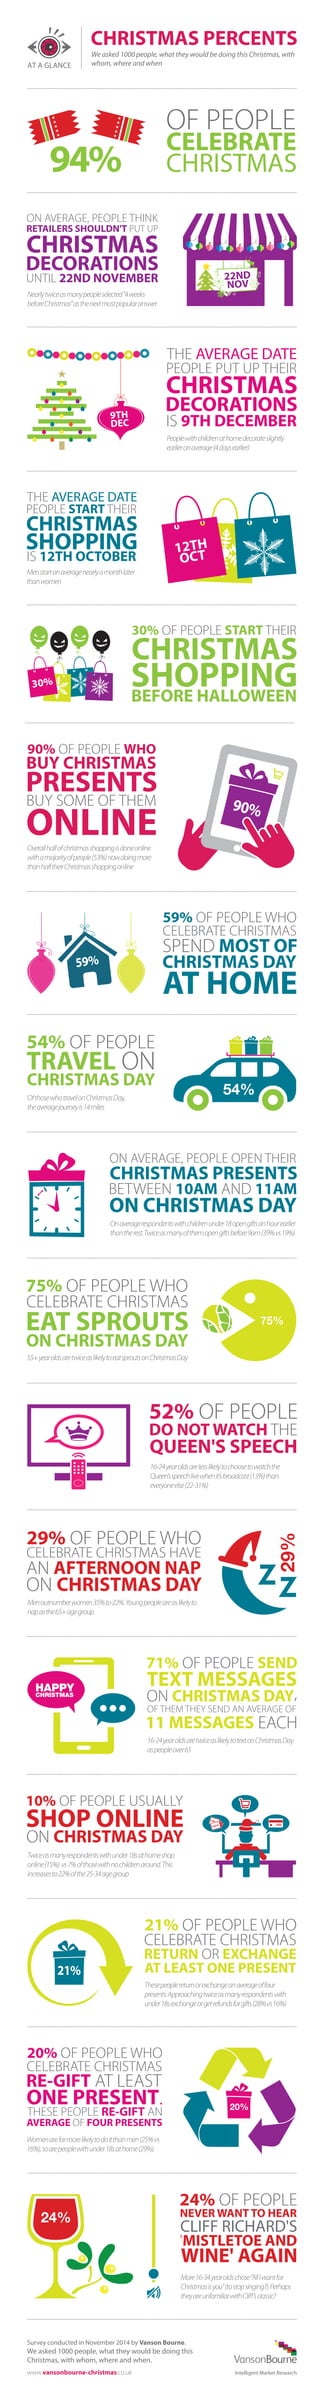 AT A GLANCE 
CHRISTMAS PERCENTS 
We asked 1000 people, what they would be doing this Christmas, with 
whom, where and when 
94% 
OF PEOPLE 
CELEBRATE 
CHRISTMAS 
THE AVERAGE DATE 
PEOPLE PUT UP THEIR 
CHRISTMAS 
IS 9TH DECEMBER 
Nearly twice as many people selected "4 weeks 
before Christmas" as the next most popular answer 
PEOPLE START THEIR 
CHRISTMAS 
IS 12TH OCTOBER 
SHOPPING 
Men start on average nearly a month later 
than women 
12TH 
OCT 
CHRISTMAS 
SHOPPING 
30% 
90% OF PEOPLE WHO 
BUY CHRISTMAS 
BUY SOME OF THEM 
PRESENTS 
ONLINE 
59% OF PEOPLE WHO 
CELEBRATE CHRISTMAS 
CHRISTMAS DAY 
SPEND MOST OF 
AT HOME 
ON AVERAGE, PEOPLE OPEN THEIR 
CHRISTMAS PRESENTS 
ON CHRISTMAS DAY 
BETWEEN 10AM AND 11AM 
75% OF PEOPLE WHO 
CELEBRATE CHRISTMAS 
ON CHRISTMAS DAY 
EAT SPROUTS 
55+ year olds are twice as likely to eat sprouts on Christmas Day 
52% OF PEOPLE 
QUEEN'S SPEECH 
DO NOT WATCH THE 
29% OF PEOPLE WHO 
CELEBRATE CHRISTMAS HAVE 
AN AFTERNOON NAP 
ON CHRISTMAS DAY 
71% OF PEOPLE SEND 
TEXT MESSAGES 
ON CHRISTMAS DAY, 
OF THEM THEY SEND AN AVERAGE OF 
11 MESSAGES EACH 
10% OF PEOPLE USUALLY 
SHOP ONLINE 
ON CHRISTMAS DAY 
21% OF PEOPLE WHO 
CELEBRATE CHRISTMAS 
RETURN OR EXCHANGE 
AT LEAST ONE PRESENT 
20% OF PEOPLE WHO 
CELEBRATE CHRISTMAS 
RE-GIFT AT LEAST 
ONE PRESENT. 
THESE PEOPLE RE-GIFT AN 
AVERAGE OF FOUR PRESENTS 
24% OF PEOPLE 
NEVER WANT TO HEAR 
CLIFF RICHARD'S 
'MISTLETOE AND 
Survey conducted in November 2014 by Vanson Bourne. 
We asked 1000 people, what they would be doing this 
Christmas, with whom, where and when. 
www.vansonbourne-christmas.co.uk 
22ND 
NOV 
9TH 
DEC 
DECORATIONS 
ON AVERAGE, PEOPLE THINK 
RETAILERS SHOULDN'T PUT UP CHRISTMAS 
UNTIL 22ND NOVEMBER 
DECORATIONS 
People with children at home decorate slightly 
earlier on average (4 days earlier) 
THE AVERAGE DATE 
30% OF PEOPLE START THEIR 
BEFORE HALLOWEEN 
Overall half of christmas shopping is done online 
with a majority of people (53%) now doing more 
than half their Christmas shopping online 
Of those who travel on Christmas Day, 
the average journey is 14 miles 
On average respondents with children under 18 open gifts an hour earlier 
than the rest. Twice as many of them open gifts before 9am (39% vs 19%) 
16-24 year olds are less likely to choose to watch the 
Queen's speech live when it’s broadcast (13%) than 
everyone else (22-31%) 
Men outnumber women 35% to 22%. Young people are as likely to 
nap as the 65+ age group. 
16-24 year olds are twice as likely to text on Christmas Day 
as people over 65 
Twice as many respondents with under 18s at home shop 
online (15%) vs 7% of those with no children around. This 
increases to 22% of the 25-34 age group 
These people return or exchange an average of four 
presents. Approaching twice as many respondents with 
under 18s exchange or get refunds for gifts (28% vs 16%) 
Women are far more likely to do it than men (25% vs 
16%), so are people with under 18s at home (29%). 
More 16-34 year olds chose "All I want for 
Christmas is you" (to stop singing?). Perhaps 
they are unfamiliar with Cli's classic? 
54% OF PEOPLE 
TRAVEL ON 
CHRISTMAS DAY 
90% 
59% 
54% 
75% 
29% 
HAPPY 
CHRISTMAS 
SALE 
SALE 
21% 
20% 
24% 
WINE' AGAIN 
